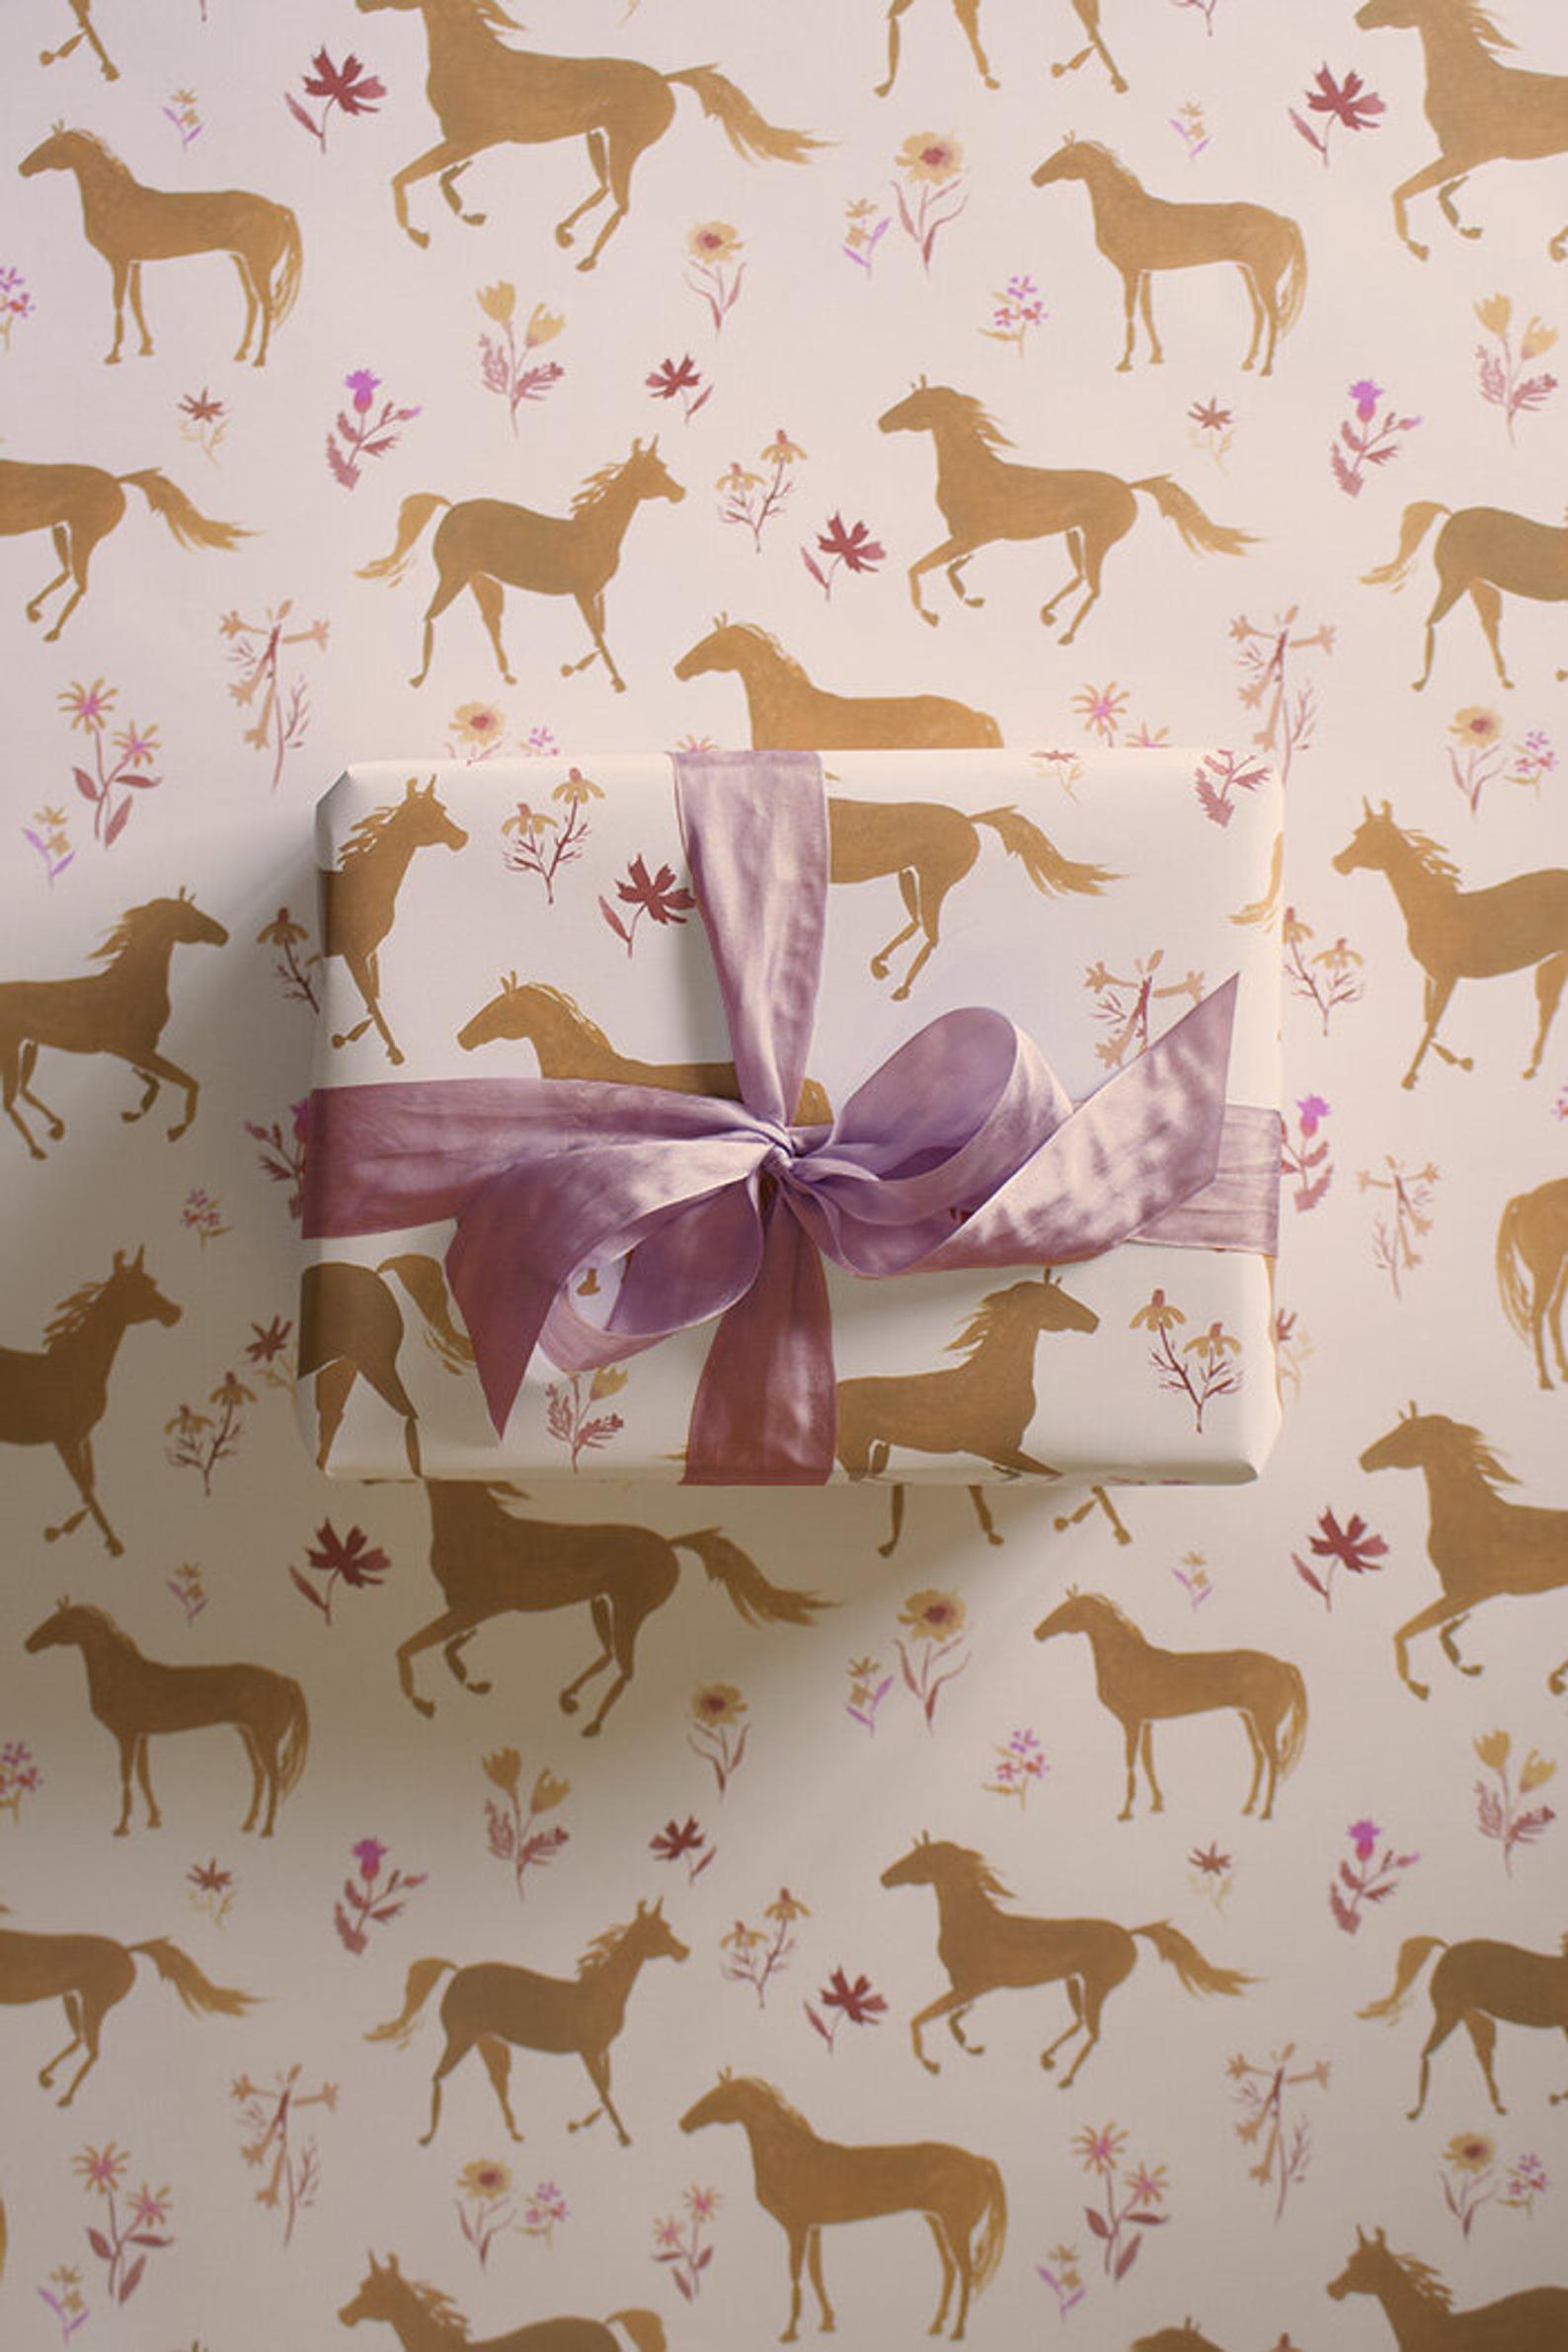 Love and kisses horses wrapping paper